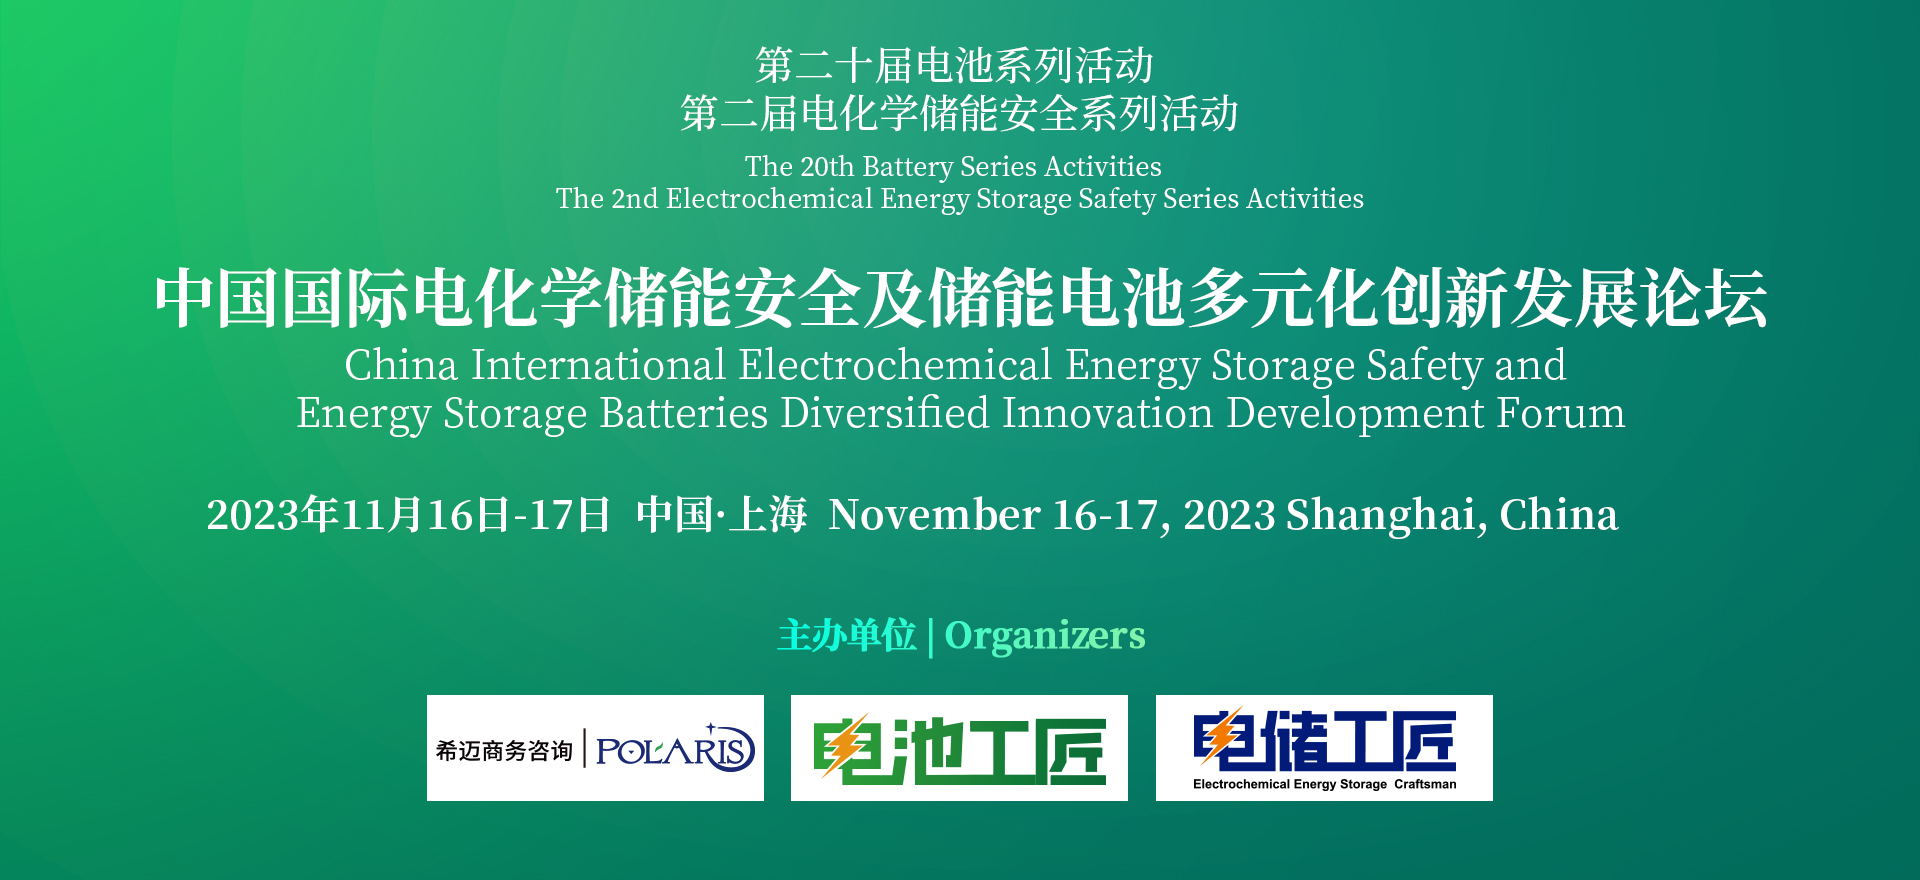 China International Power Battery Safety Design and Manufacturing Forum